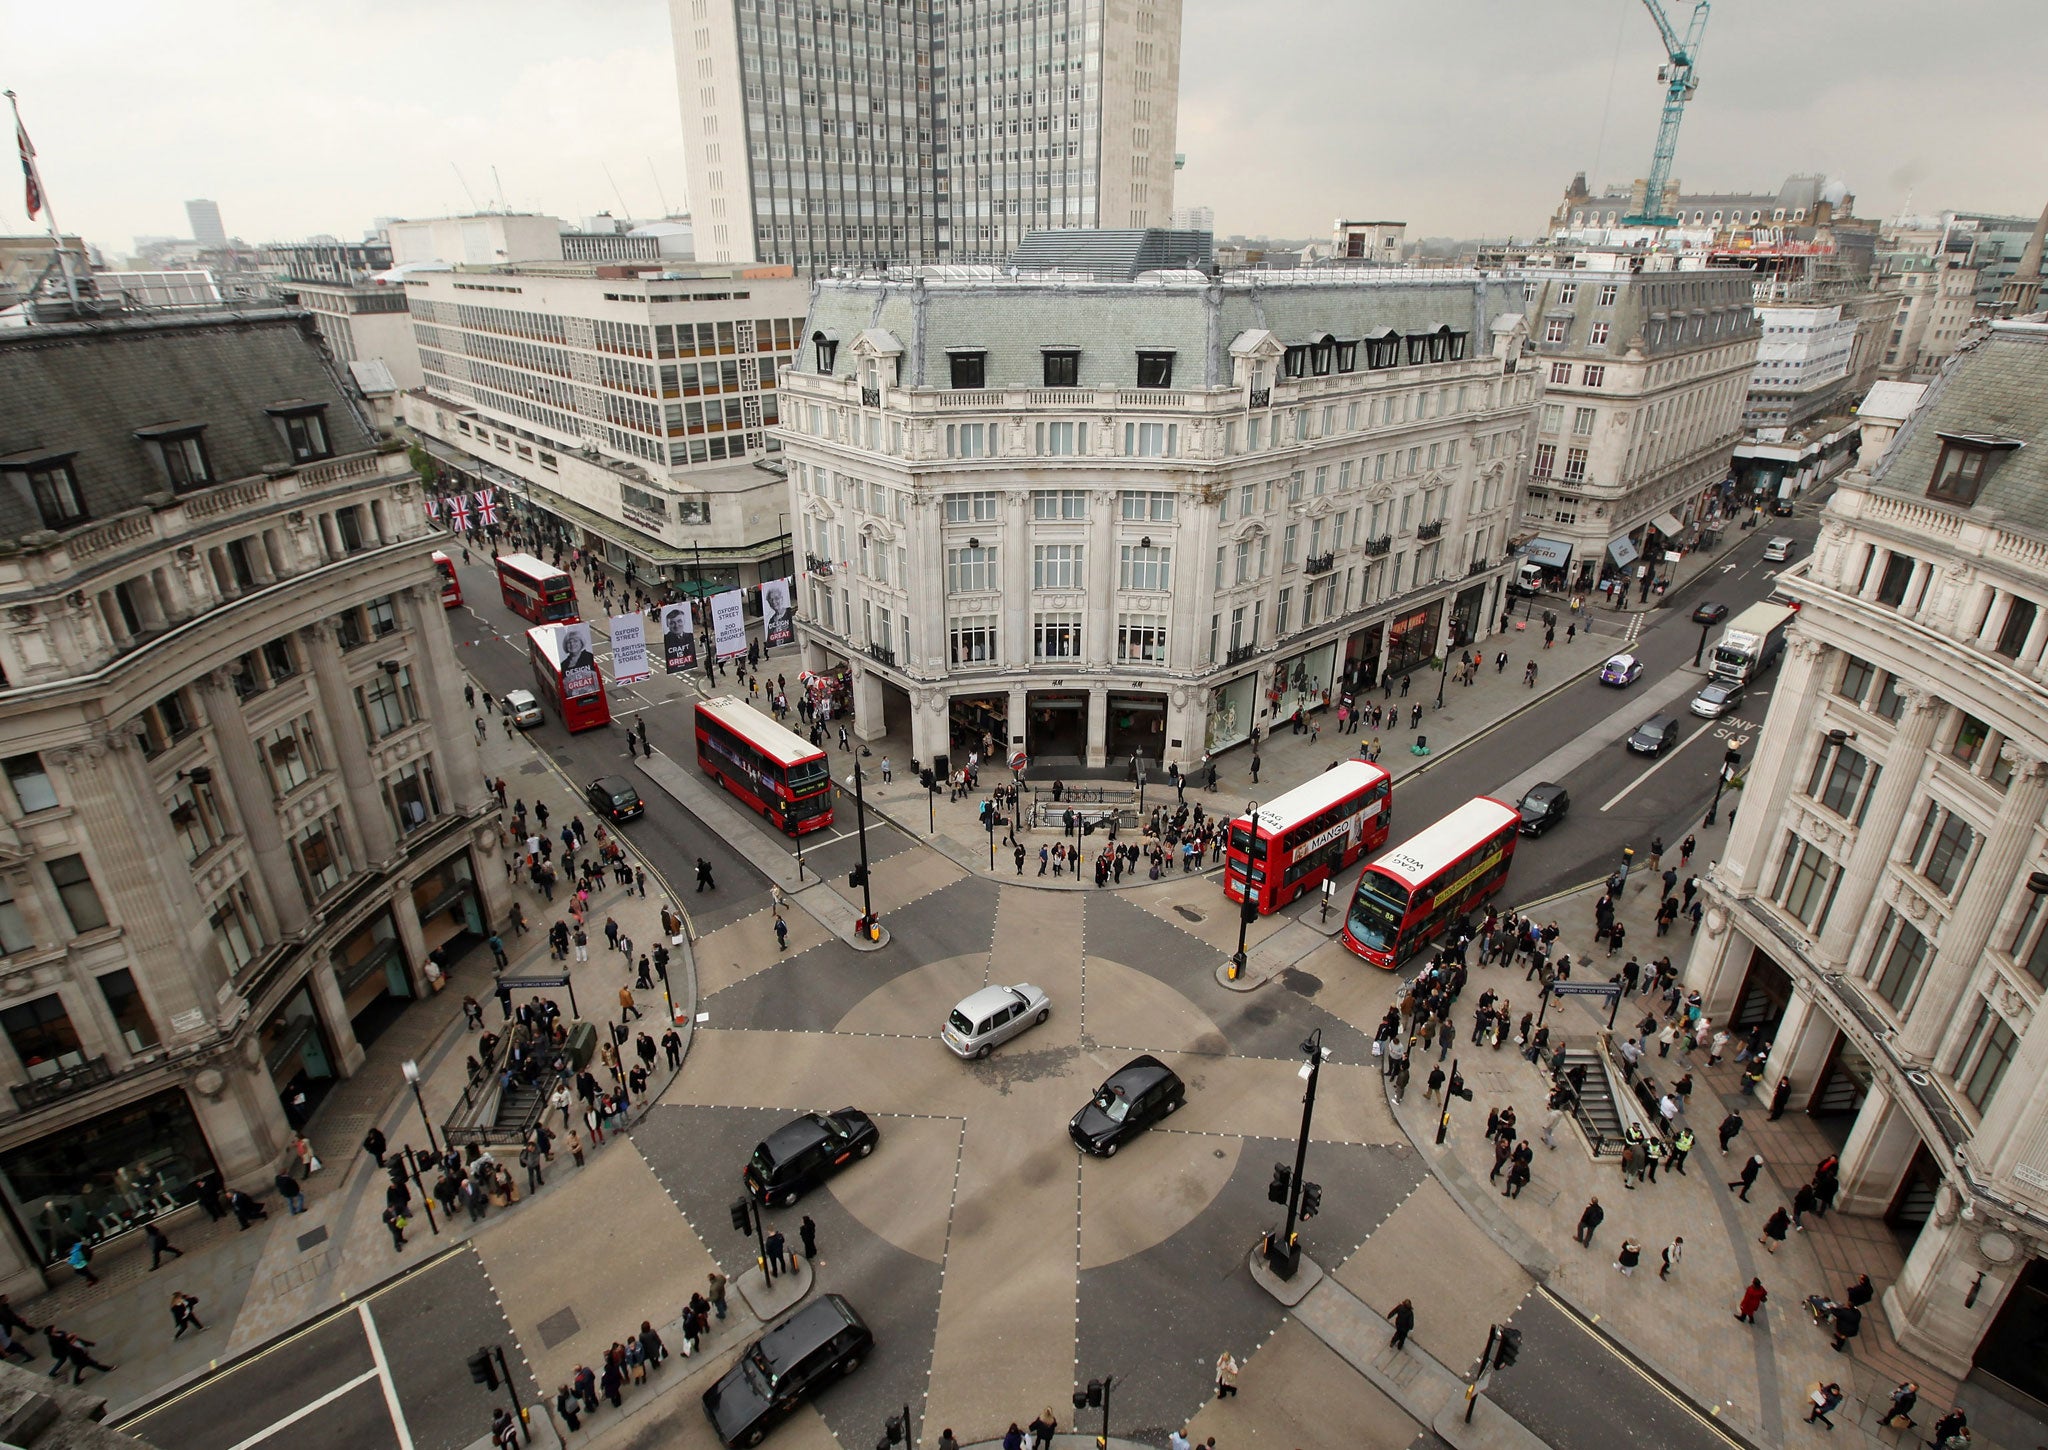 Oxford Circus' 'wall of buses' contributes to the high NO2 levels